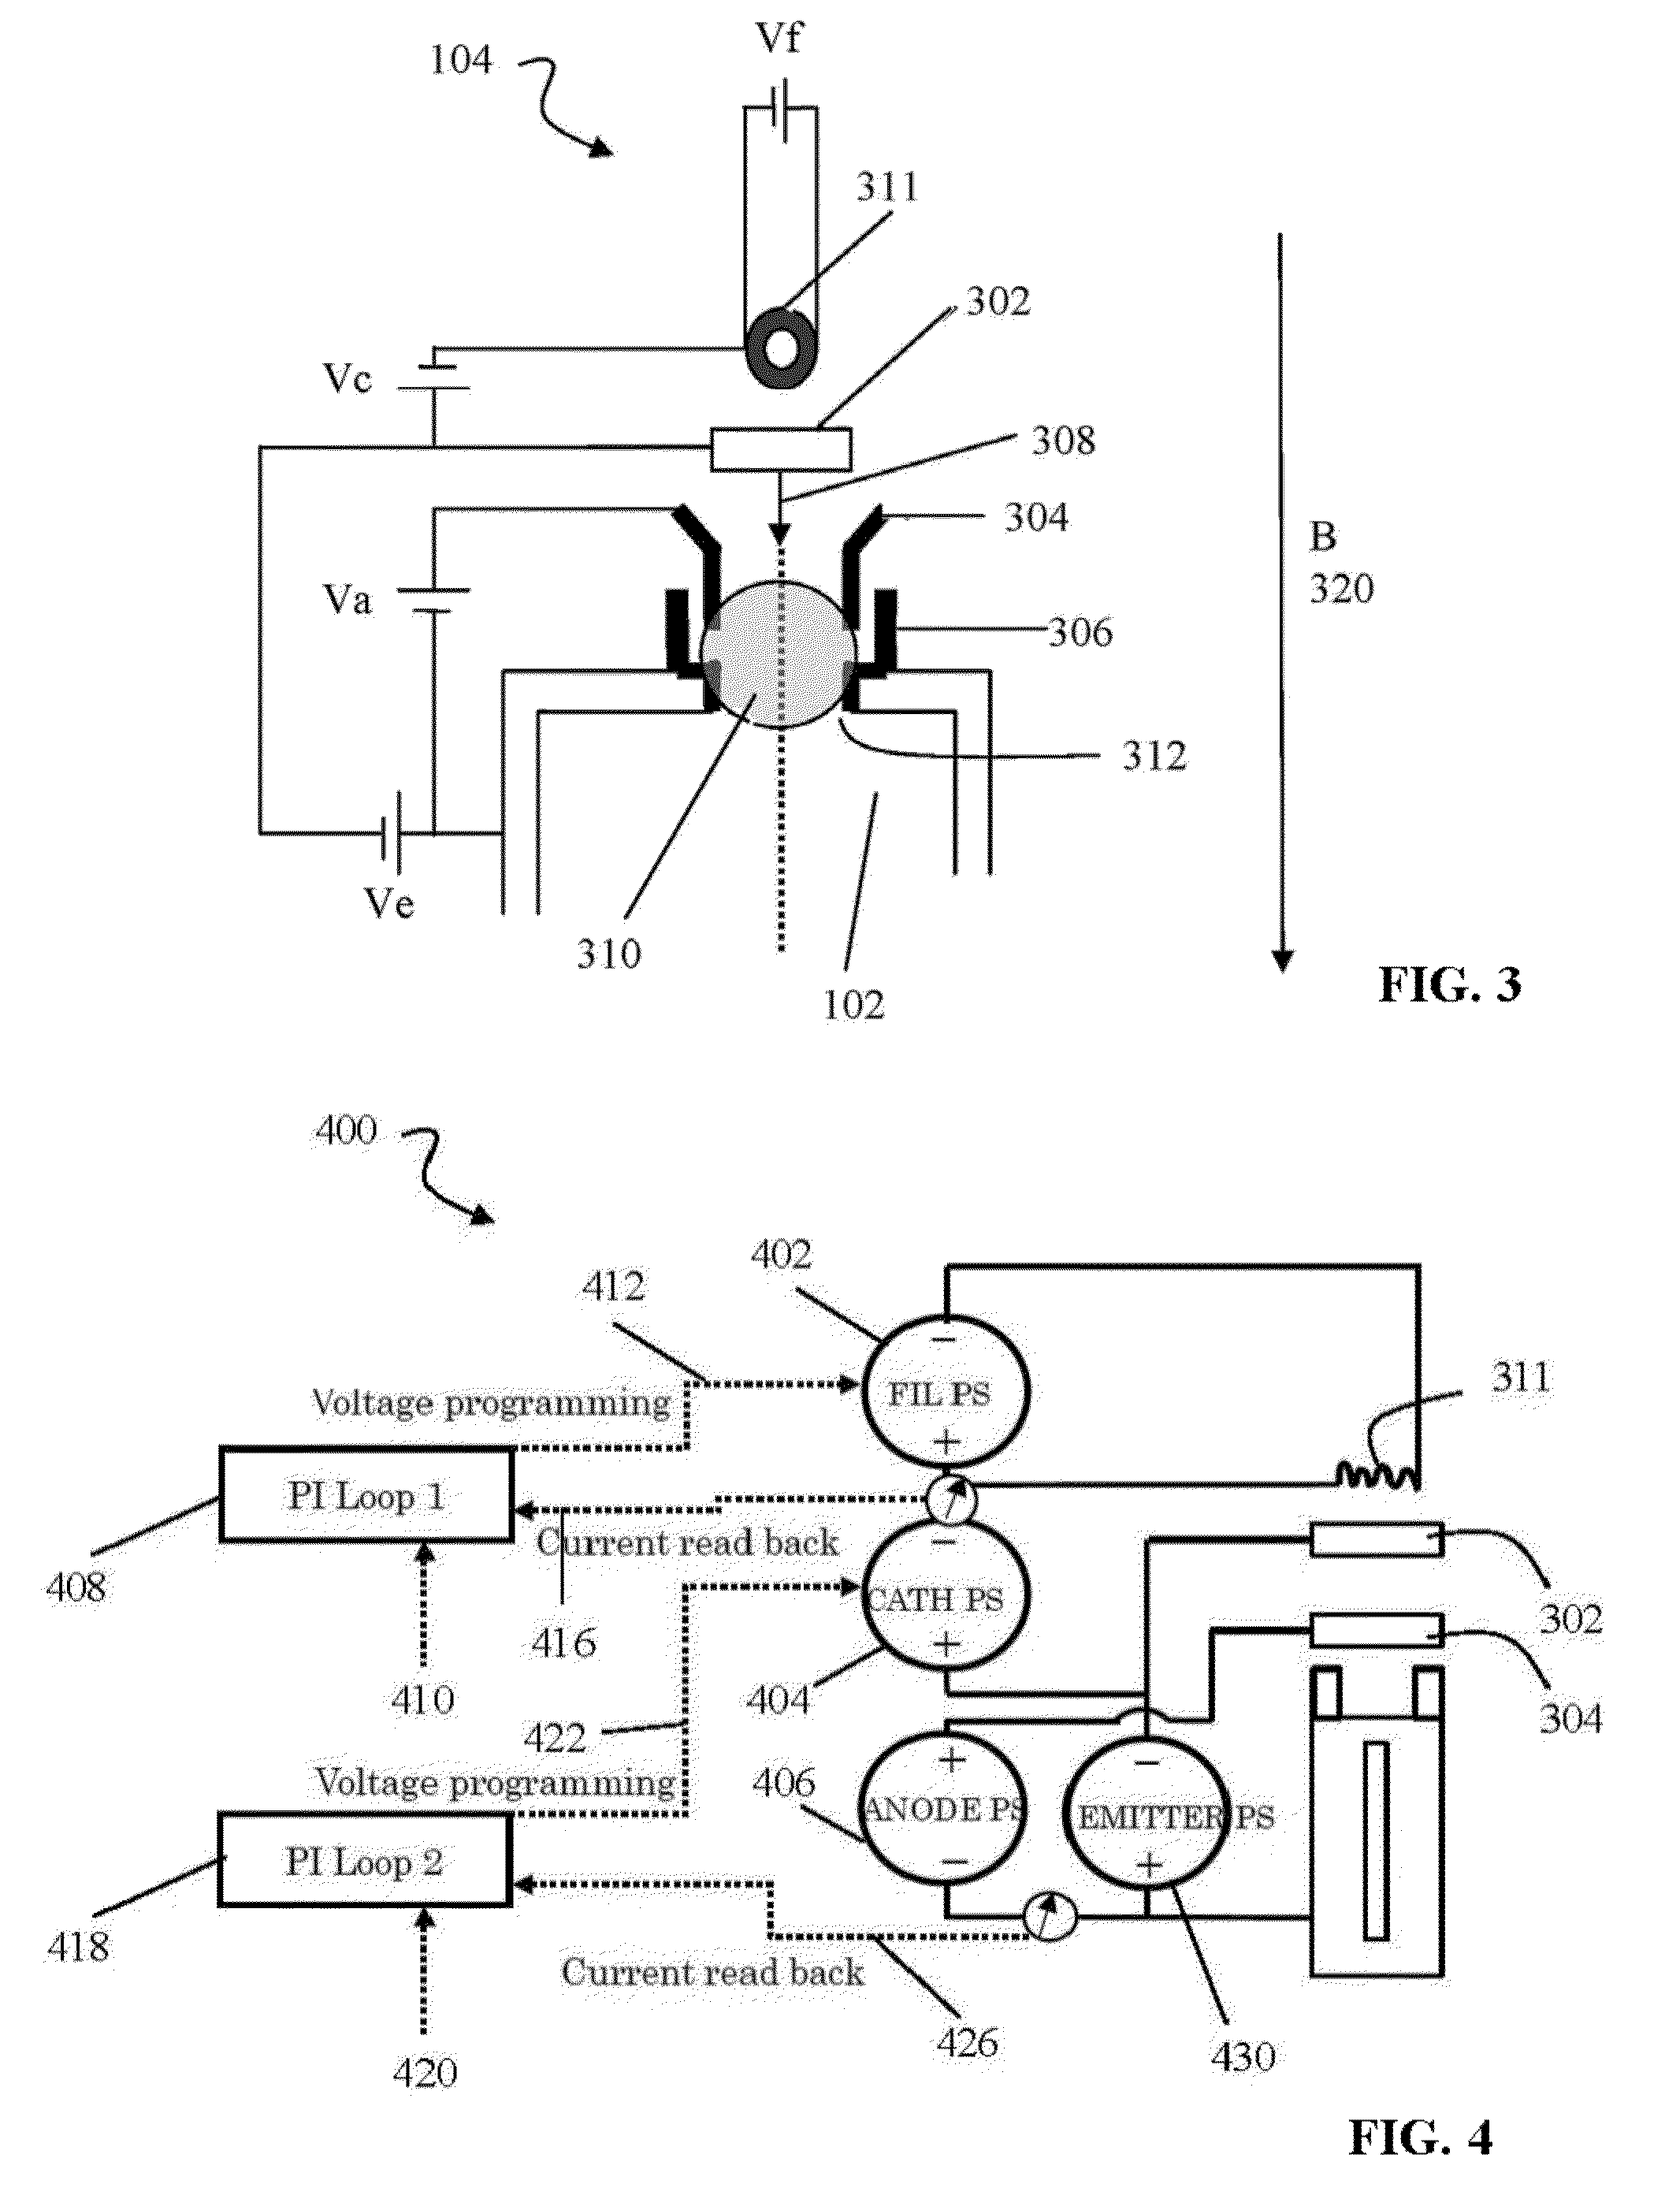 Plasma Generator With at Least One Non-Metallic Component